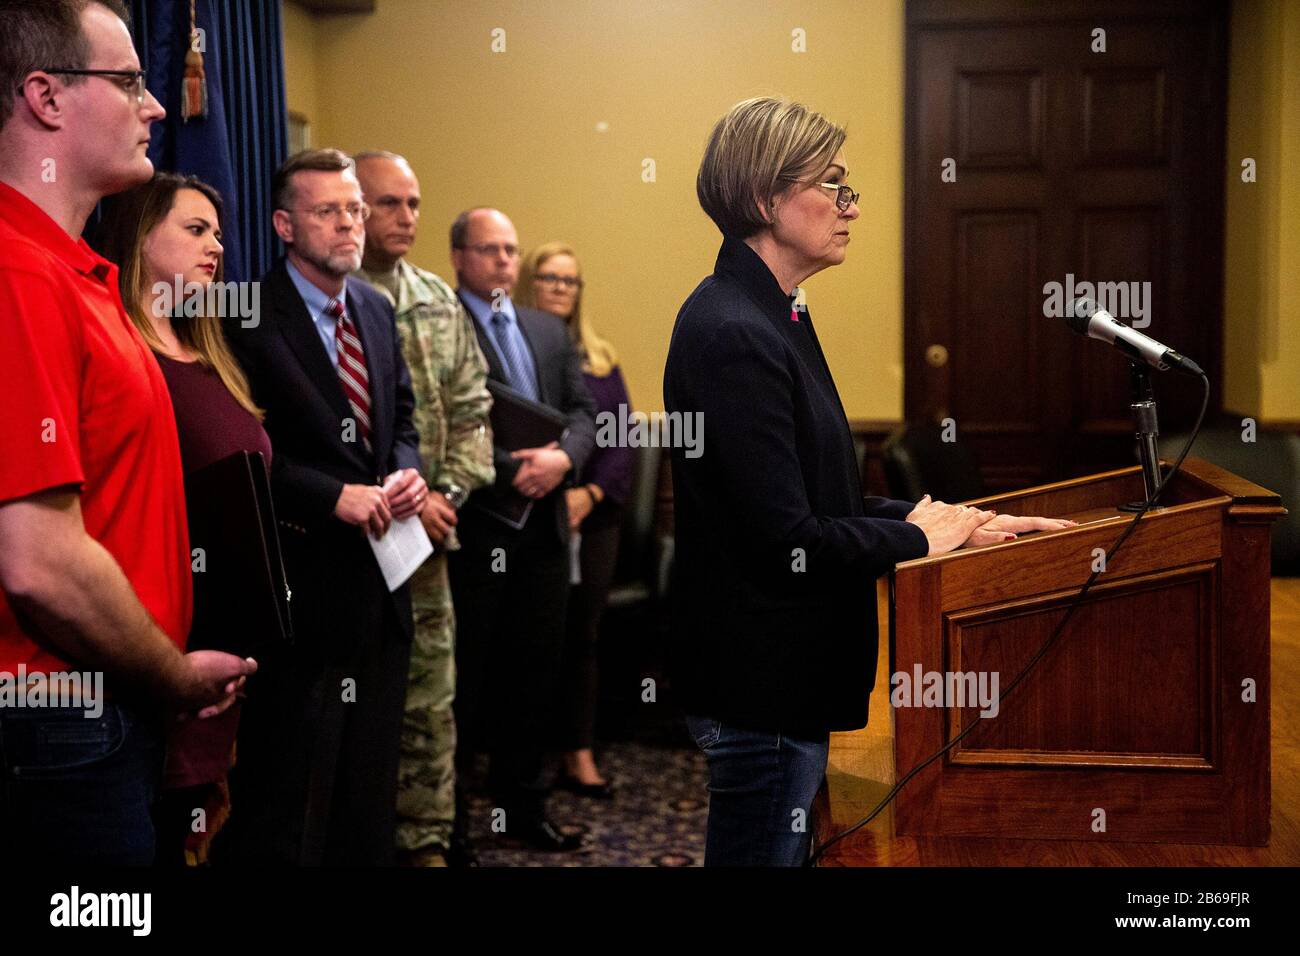 Des Moines, USA. 08th Mar, 2020. Mar 8, 2020; Des Moines, Iowa, USA; Governor Kim Reynolds speaks to the press during a news conference to announce three presumptive COVID-19 coronavirus cases at the Iowa State Capitol. (Photo by Kelsey Kremer/The Register/USA Today Network/Sipa USA) Credit: Sipa USA/Alamy Live News Stock Photo